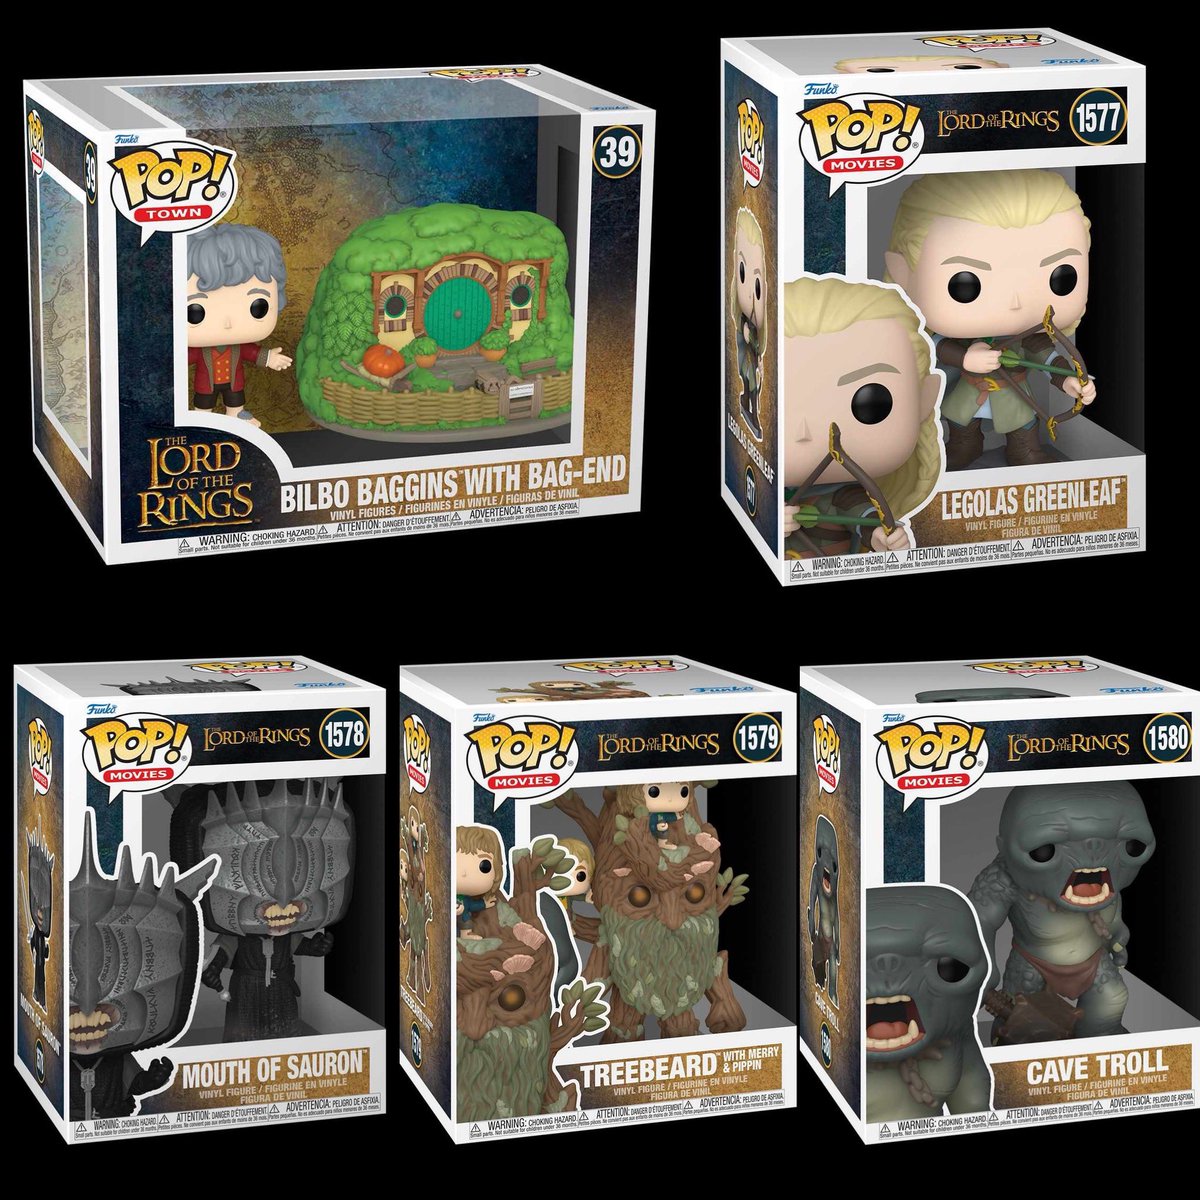 First look at Lord of the Rings Pops! . #LordoftheRings #LOTR #Funko #FunkoPop #FunkoPopVinyl #Pop #PopVinyl #Collectibles #Collectible #FunkoCollector #FunkoPops #Collector #Toy #Toys #DisTrackers